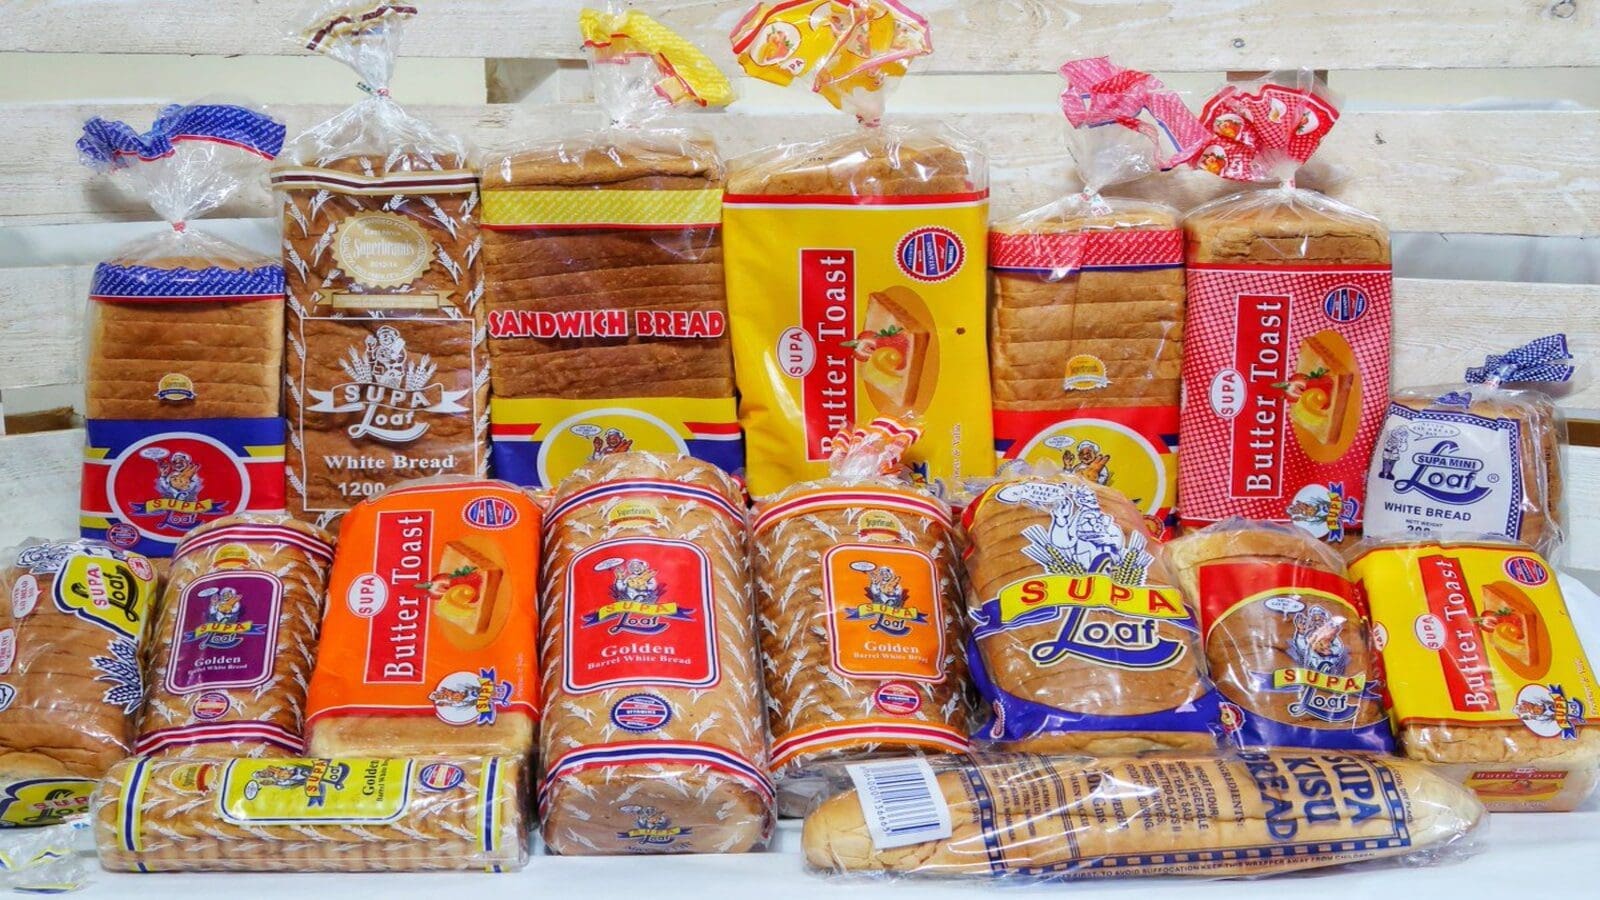 Bread prices in Kenya set to rise on new state’s proposal to introduce 16% VAT  